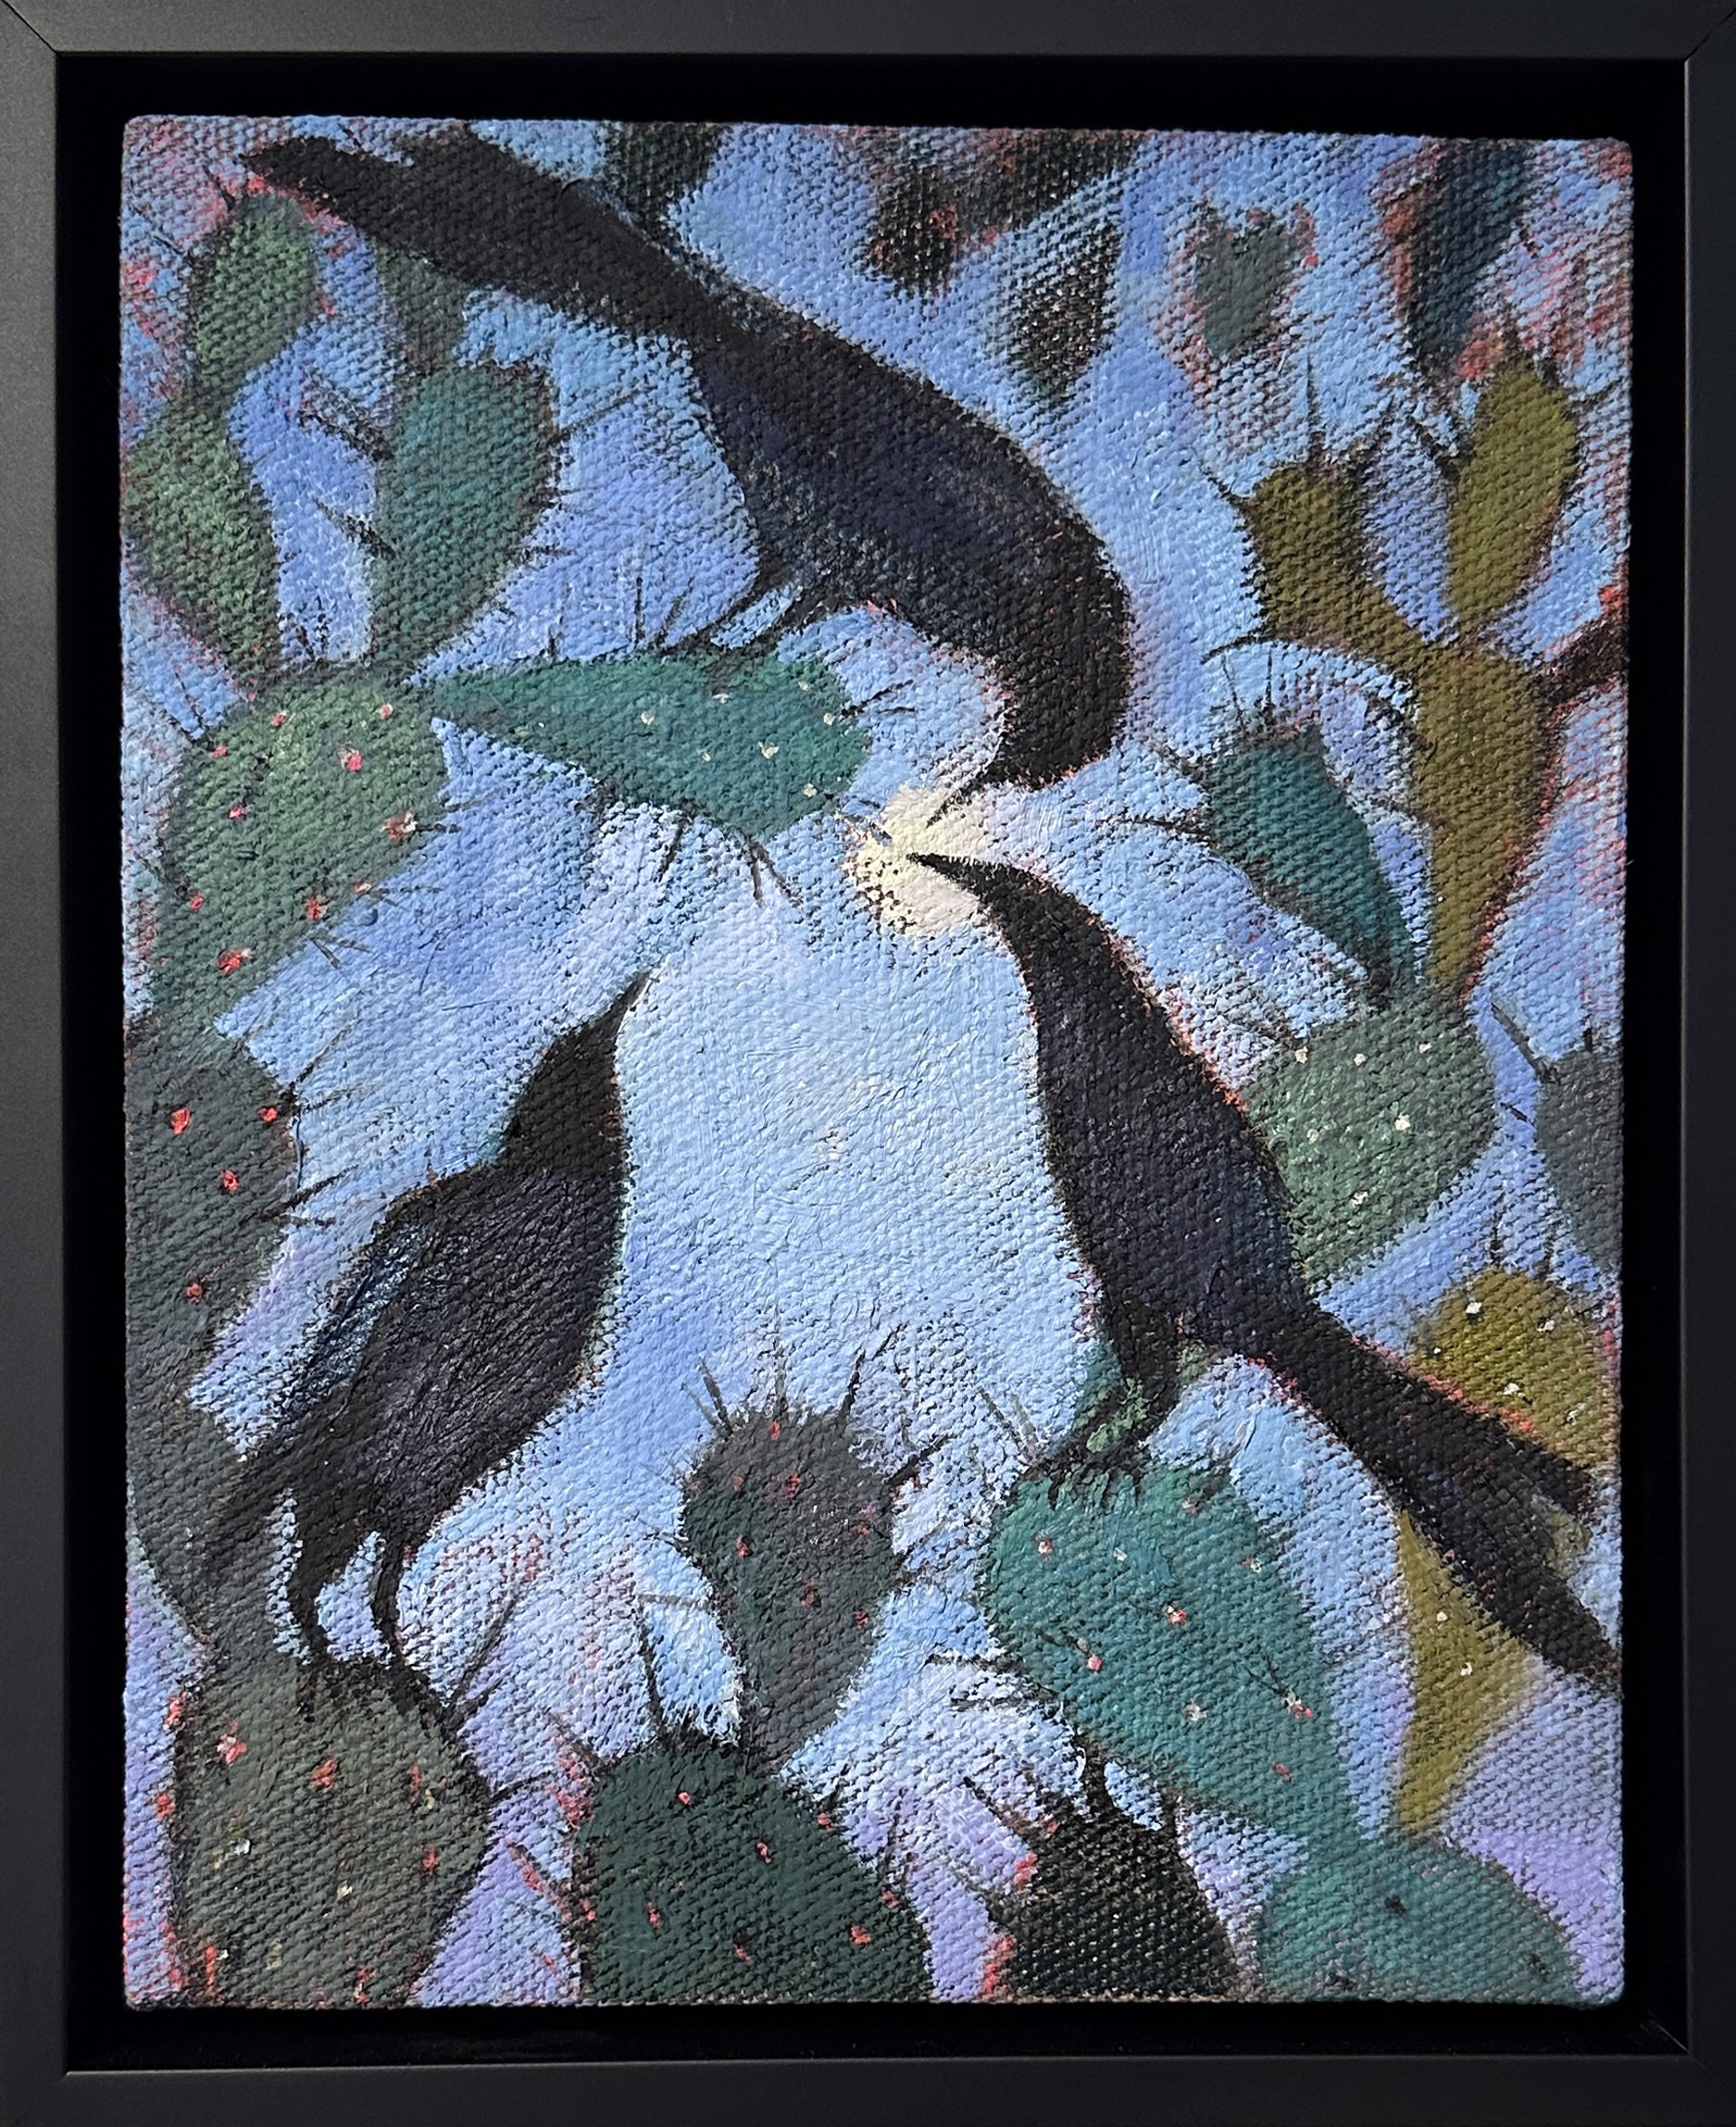 Grackle Afternoon by Sirena LaBurn